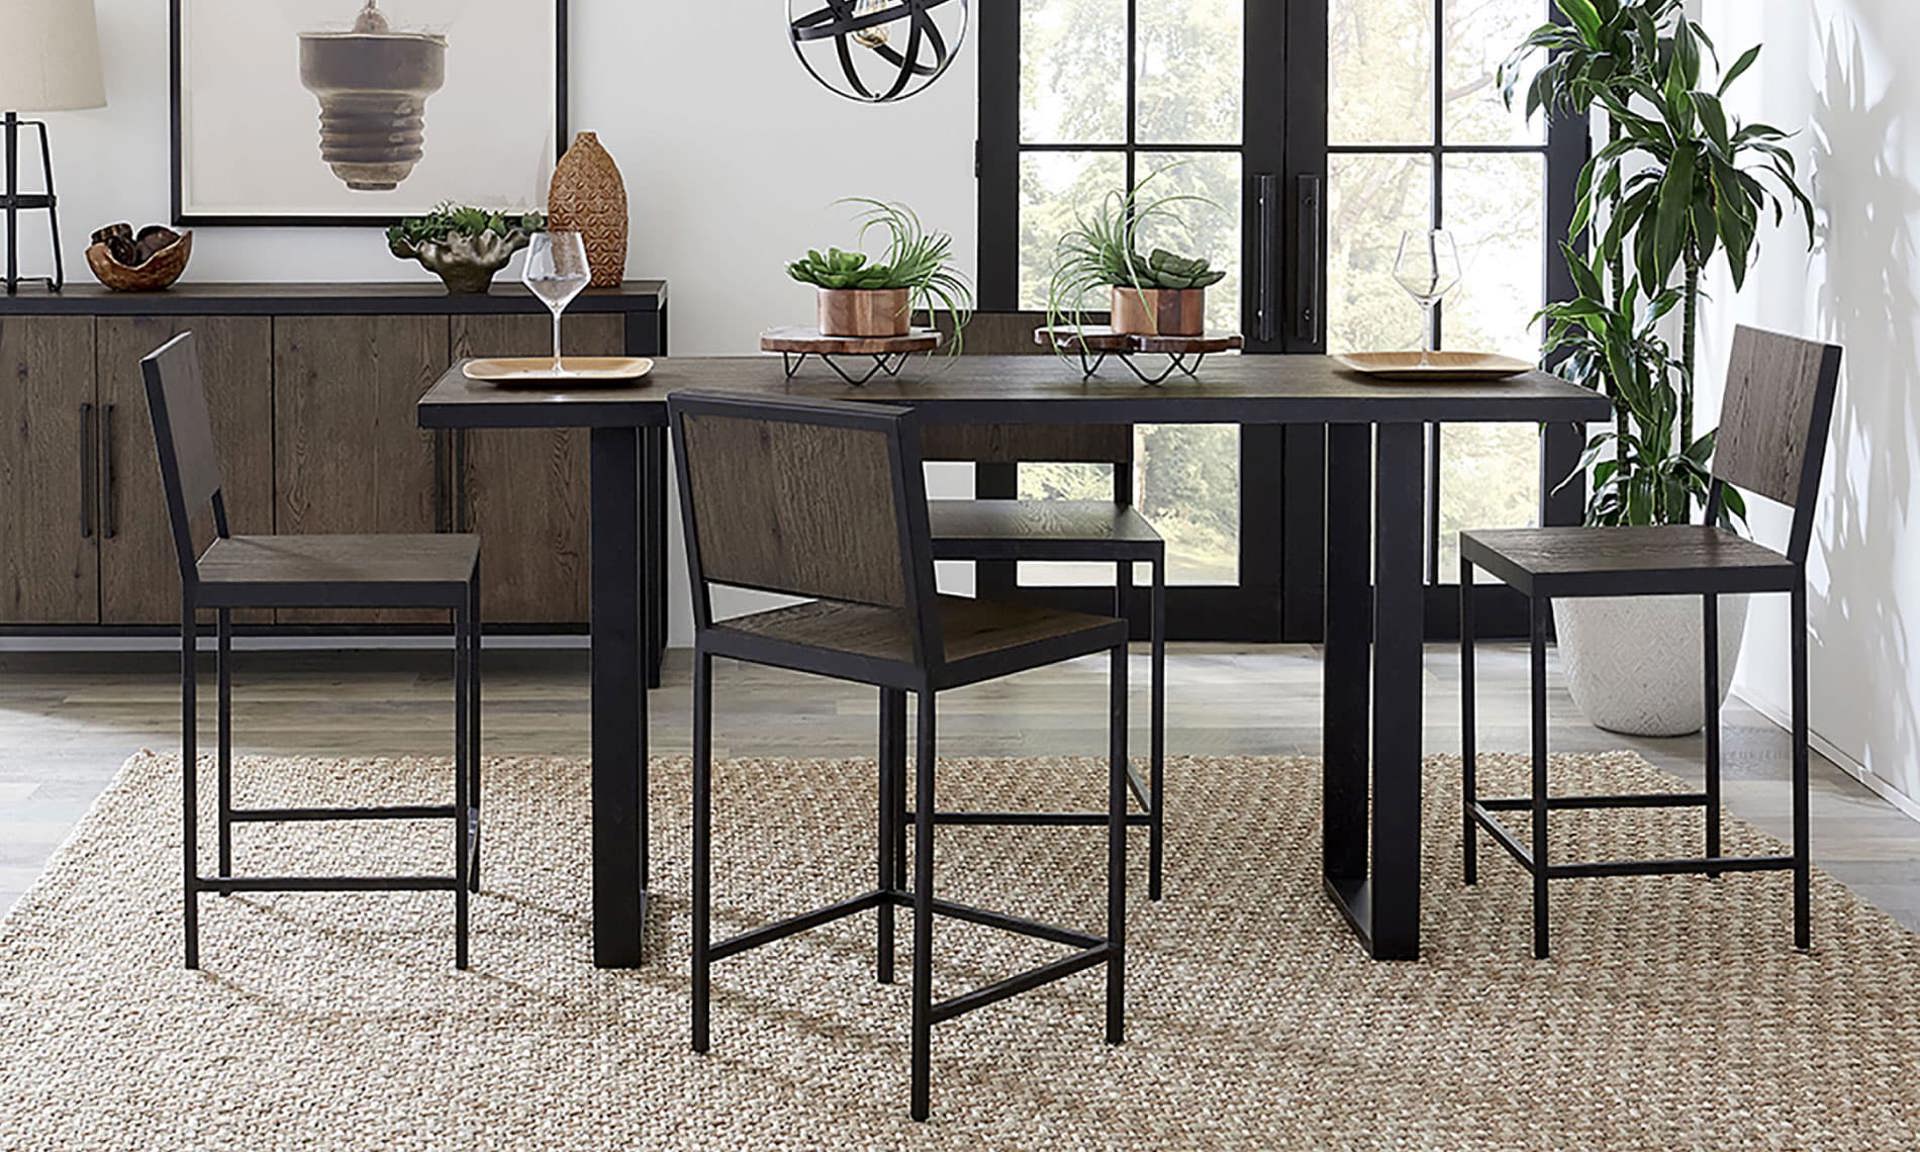 Dining stools are great for a fun and casual look for your dining room.